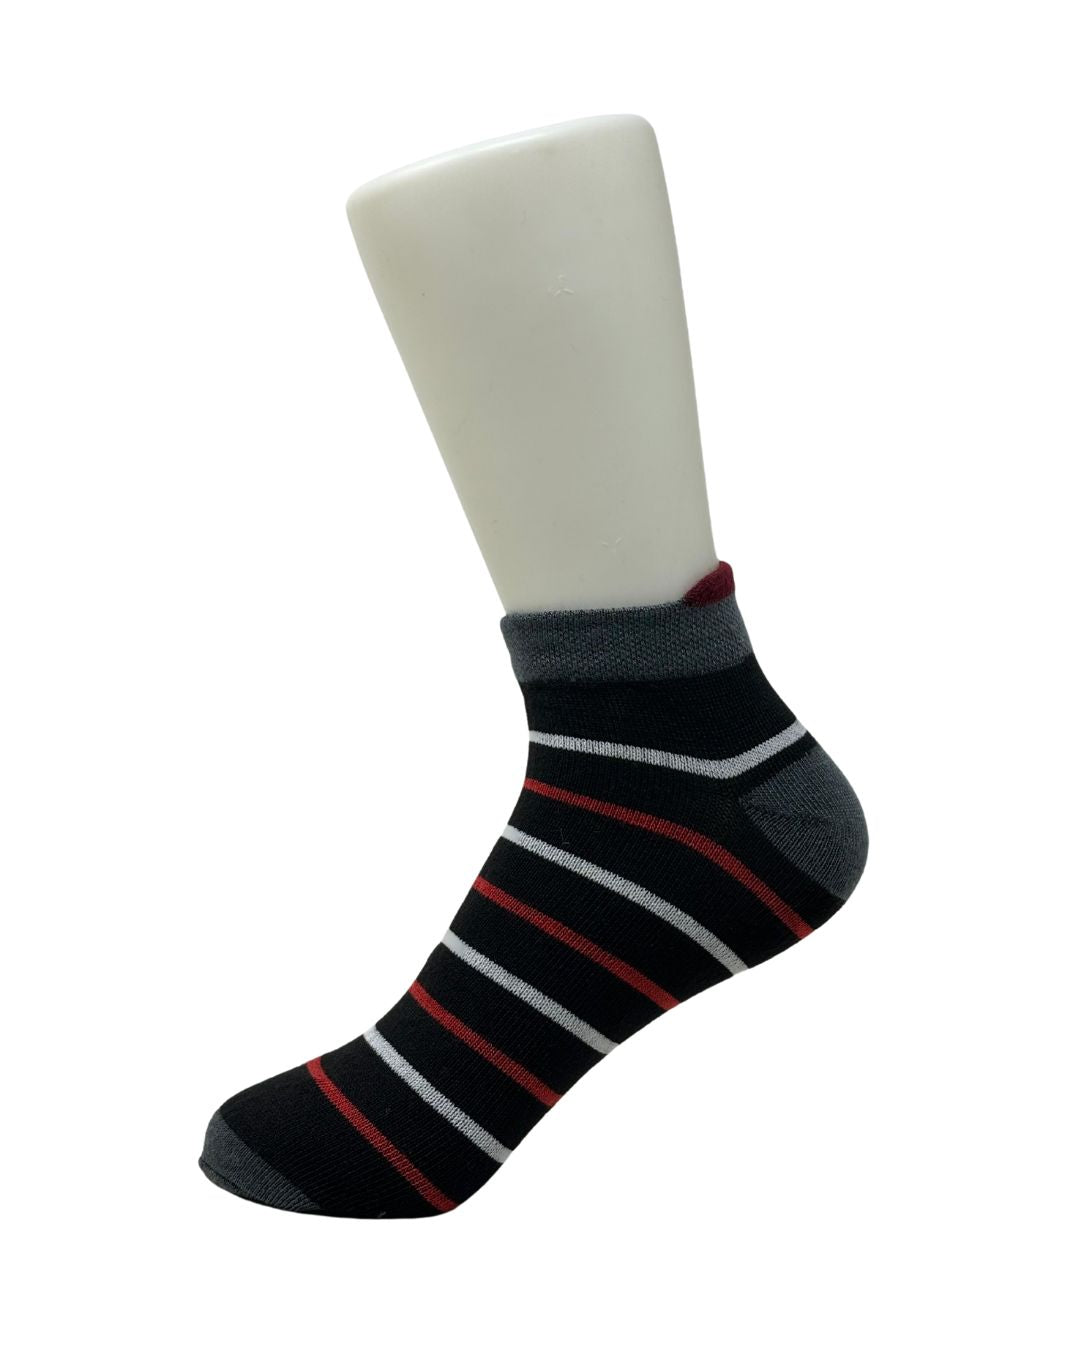 Athletic Special Design Ankle Length Socks |Free Size |Pack of 4 Pairs |With Third Heel